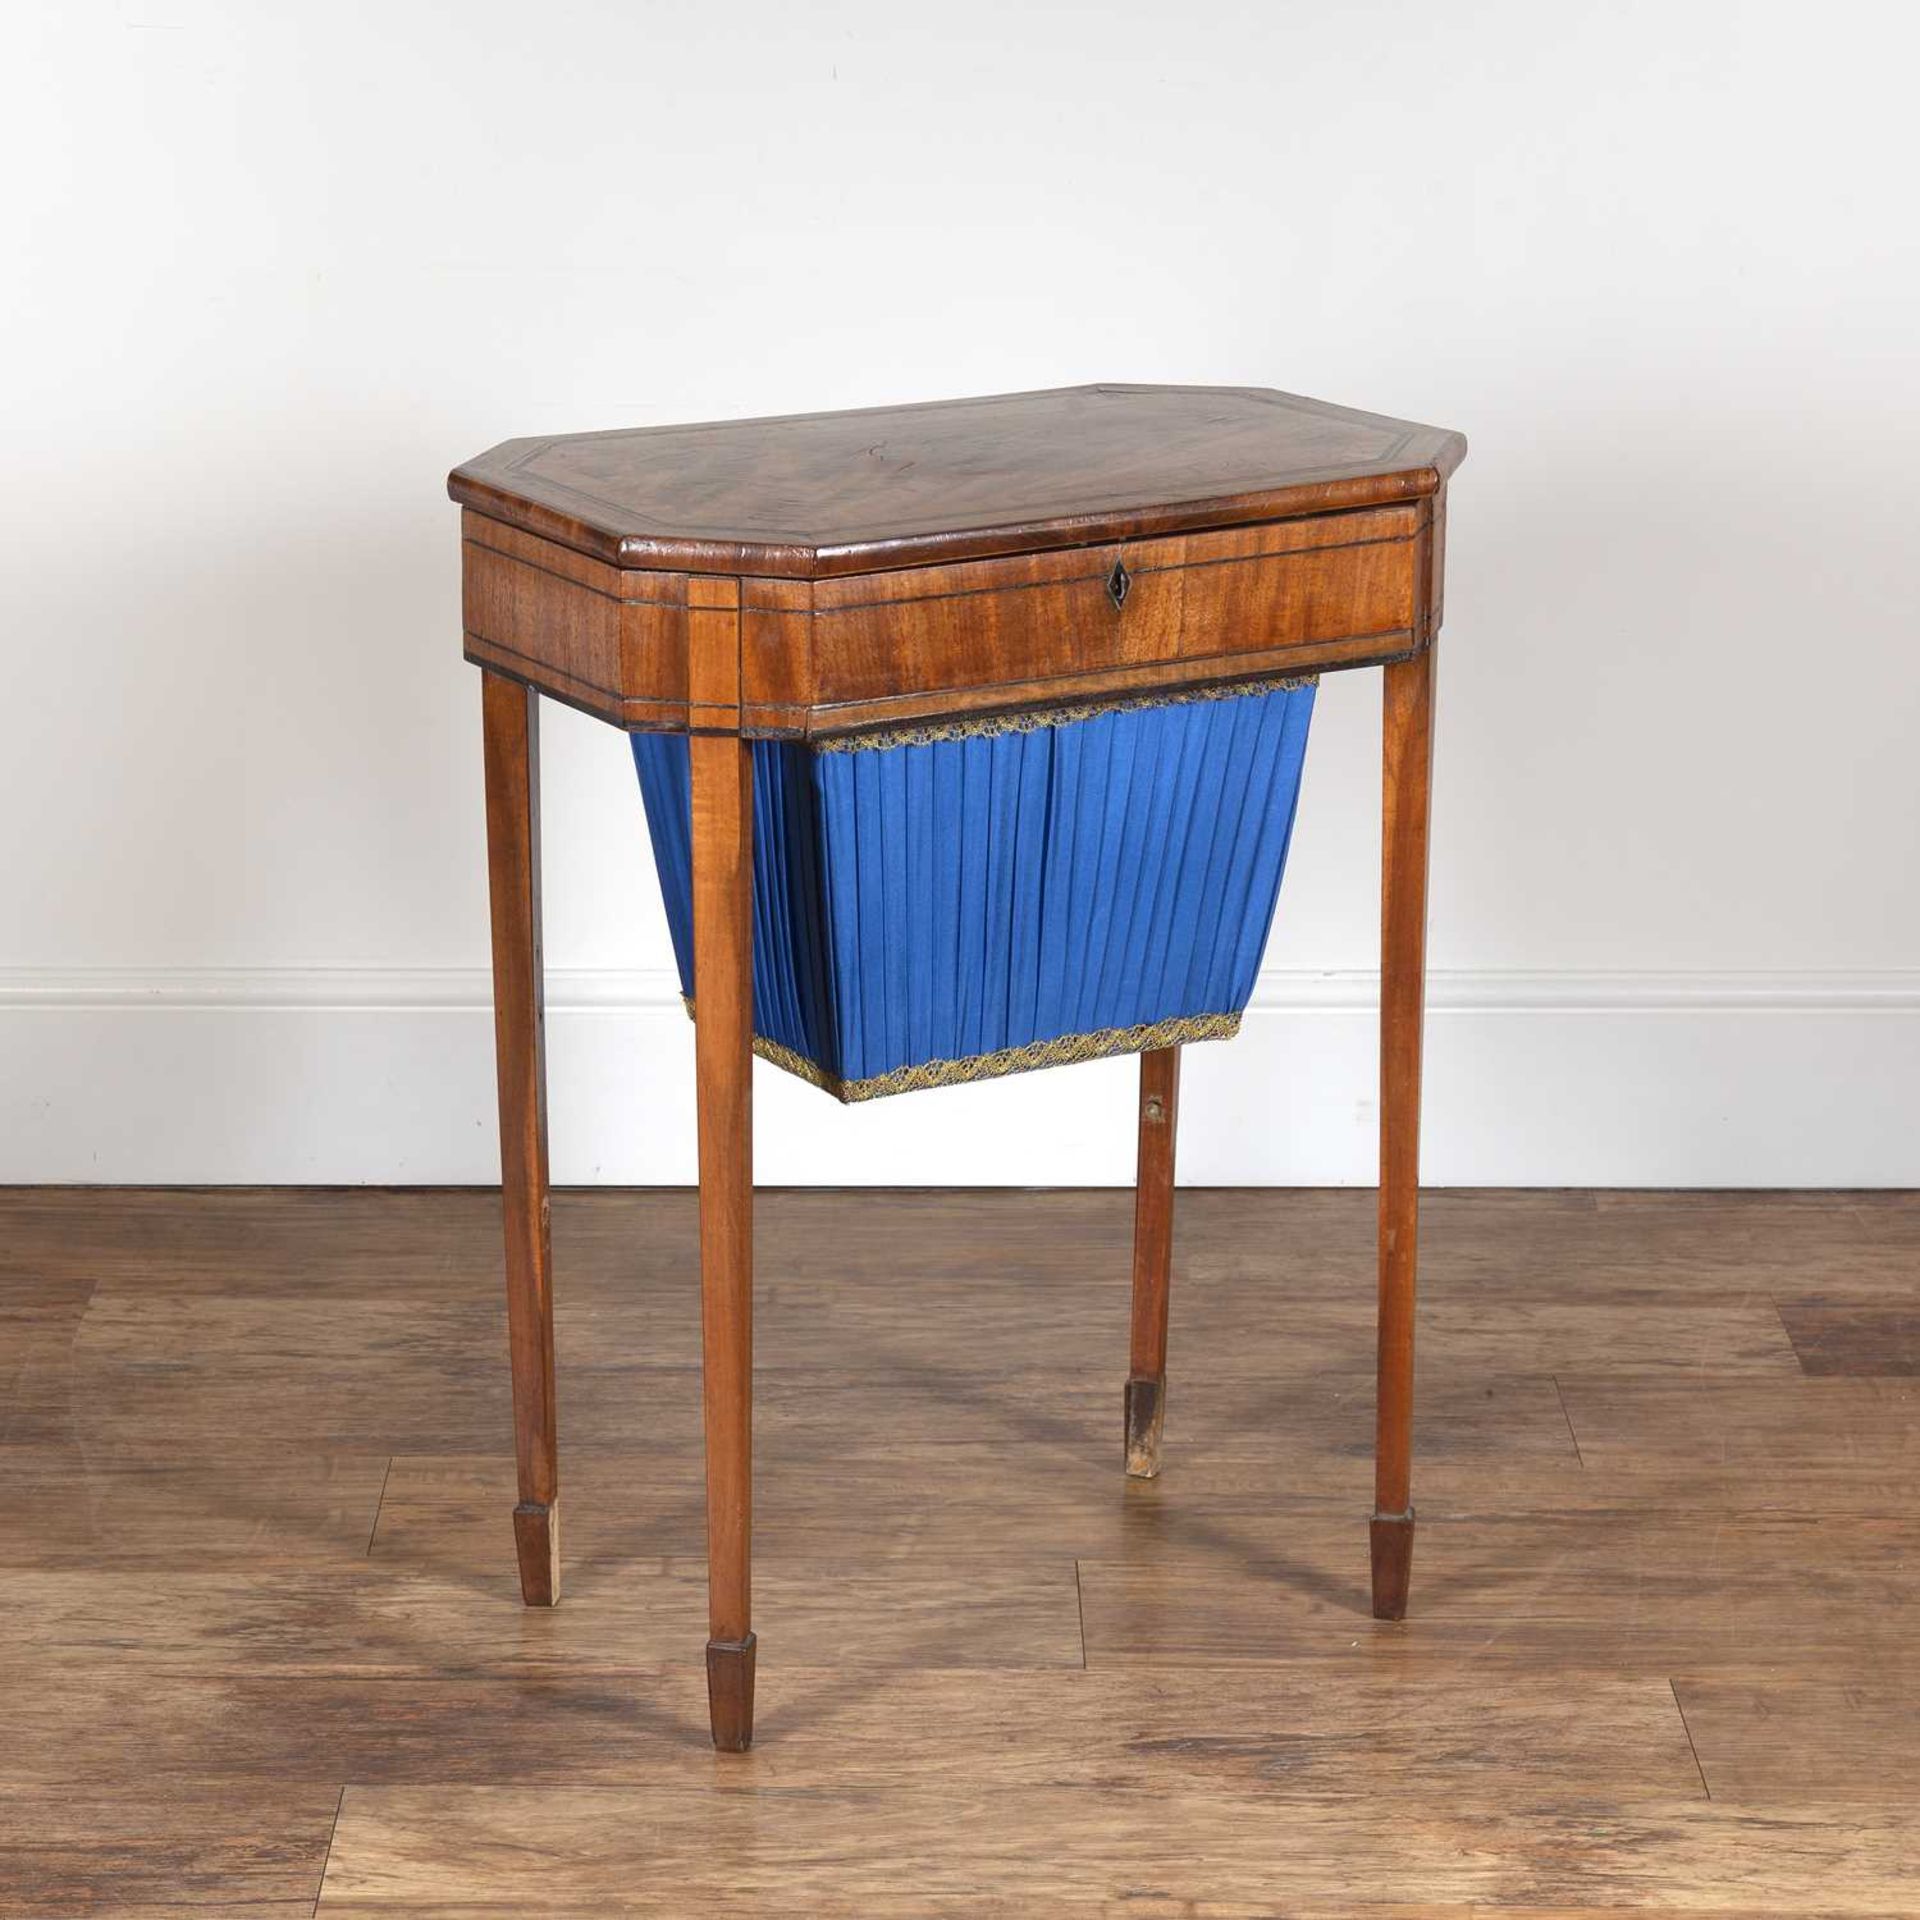 Mahogany sewing table 19th Century, a lift up lid revealing a fitted interior, above a pull-out - Image 2 of 7